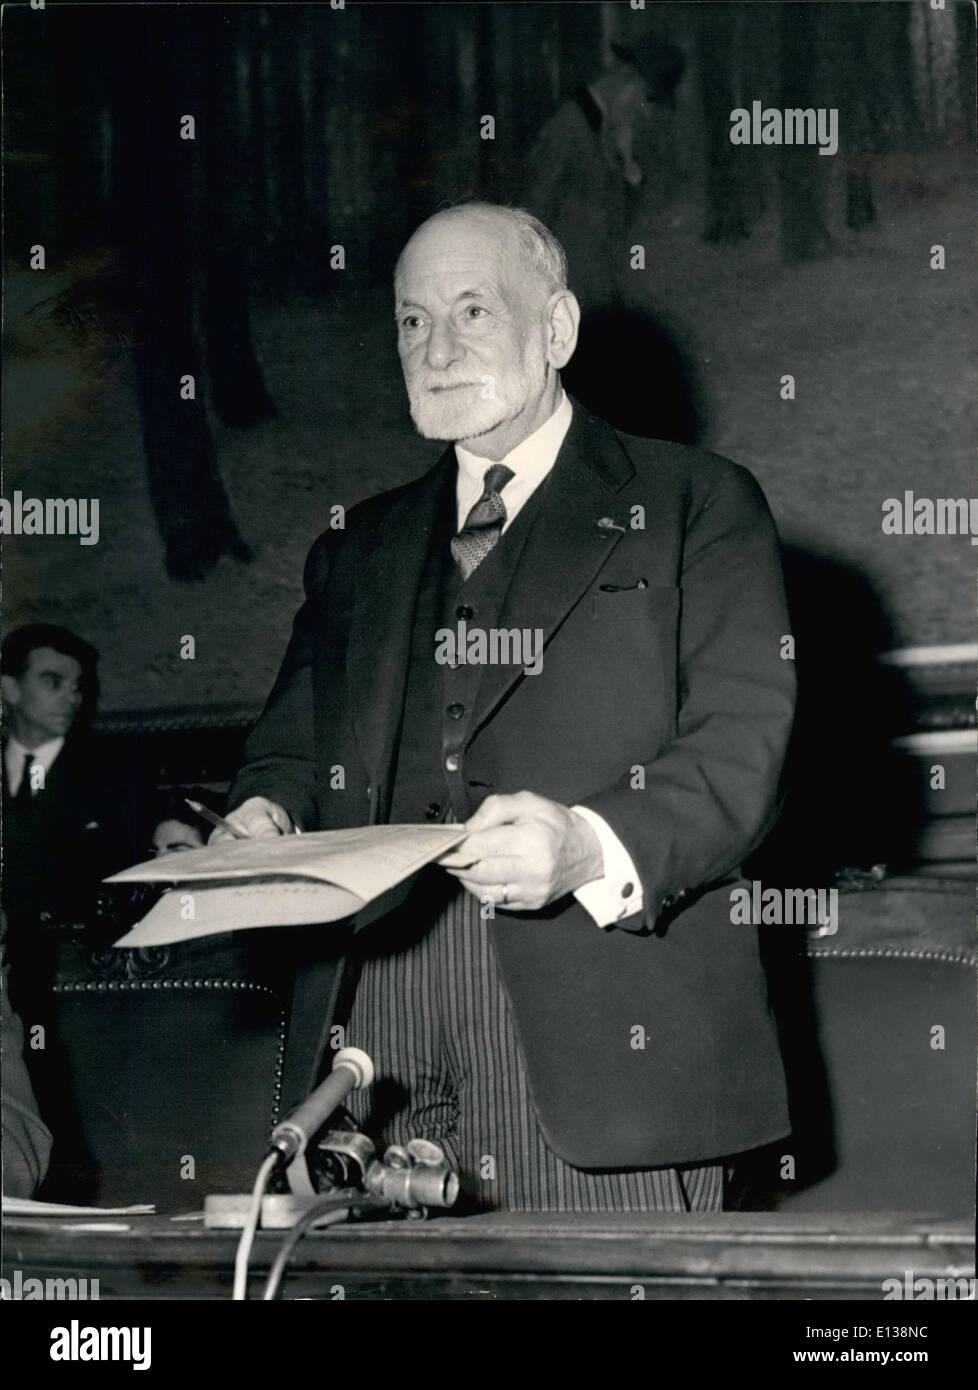 Feb. 29, 2012 - General De Gaulle elected president of the fifth republic. Photo shows M. Rene Cassin, Vice - president of the state counsel giving the official result. Stock Photo